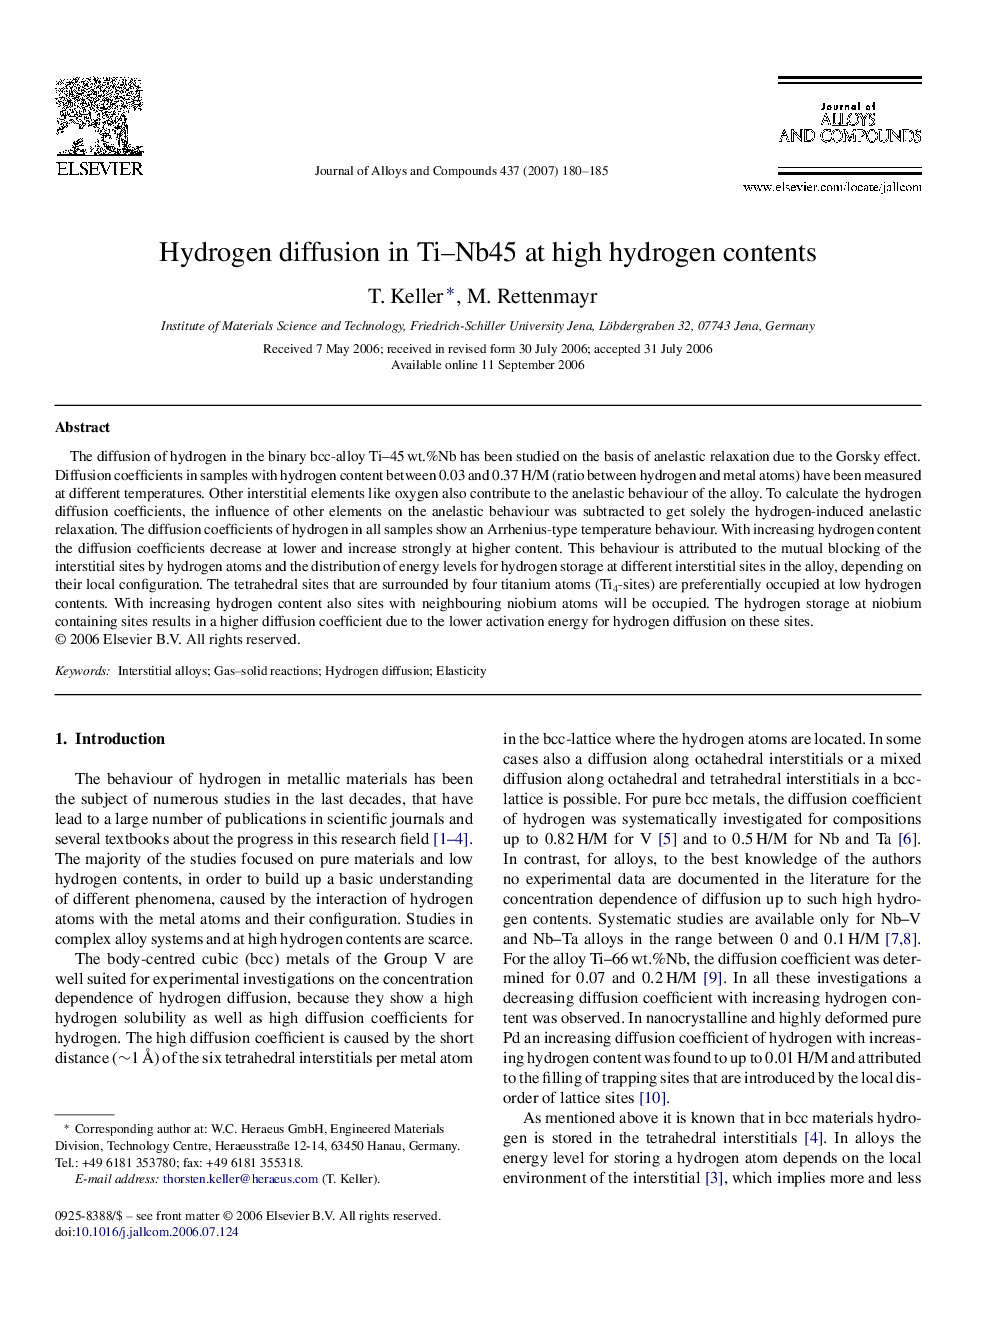 Hydrogen diffusion in Ti-Nb45 at high hydrogen contents